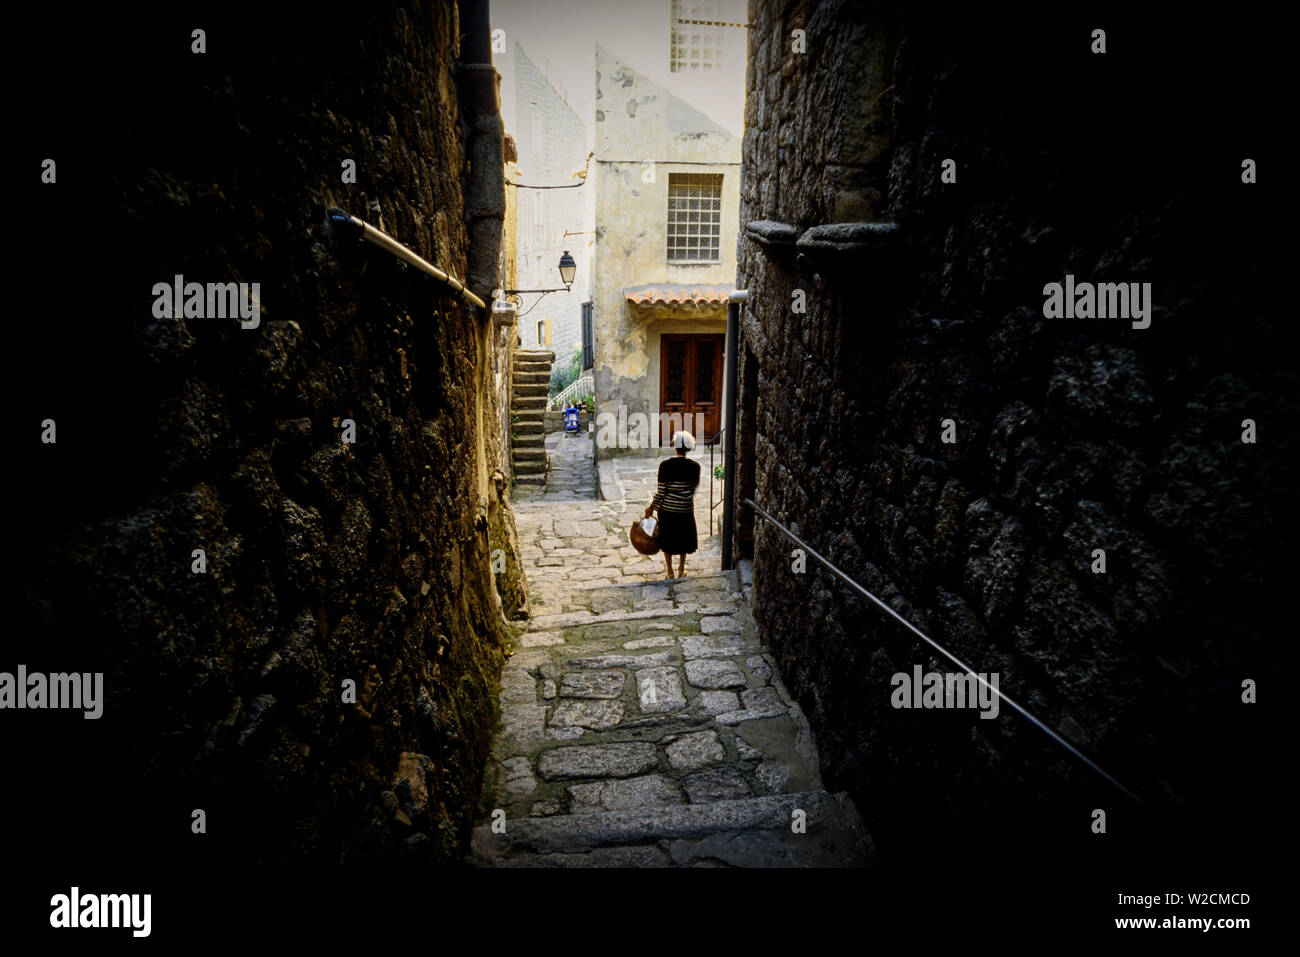 Sartene, Corsica, France. A woman walks down an alleyway. Photo: © Simon Grosset. Archive: Image digitised from an original transparency. Stock Photo